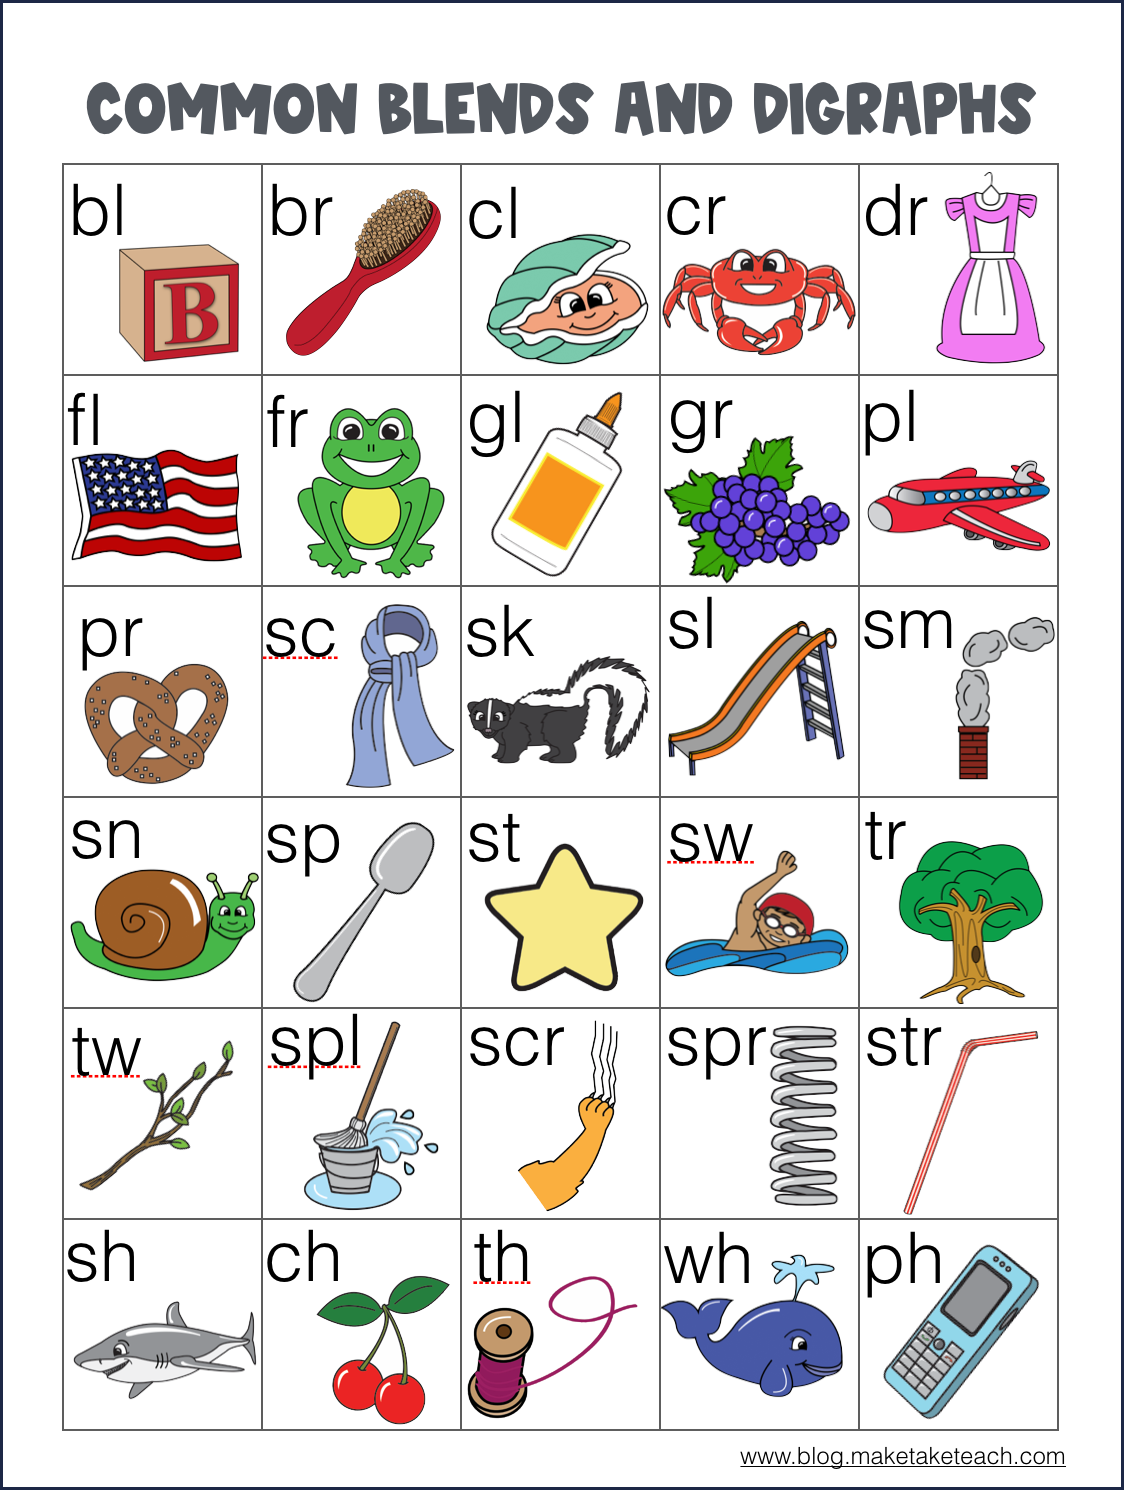 Consonant Blends and Digraphs Game Boards - Make Take & Teach